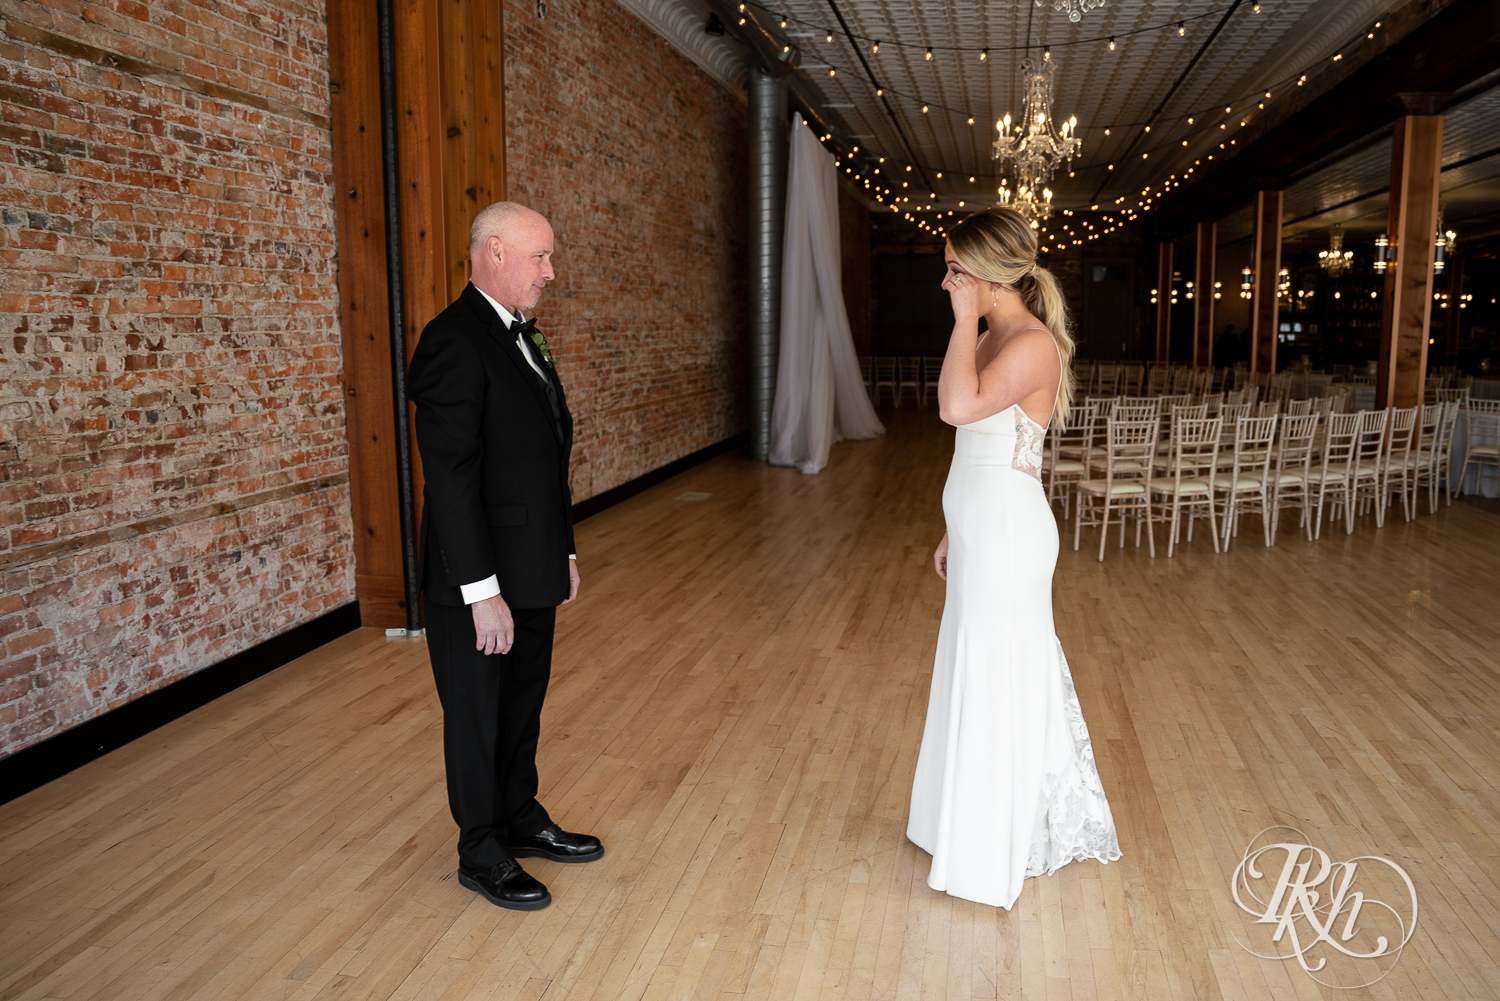 Bride and dad share first look at the 3 Ten Event Center in Faribault, Minnesota.